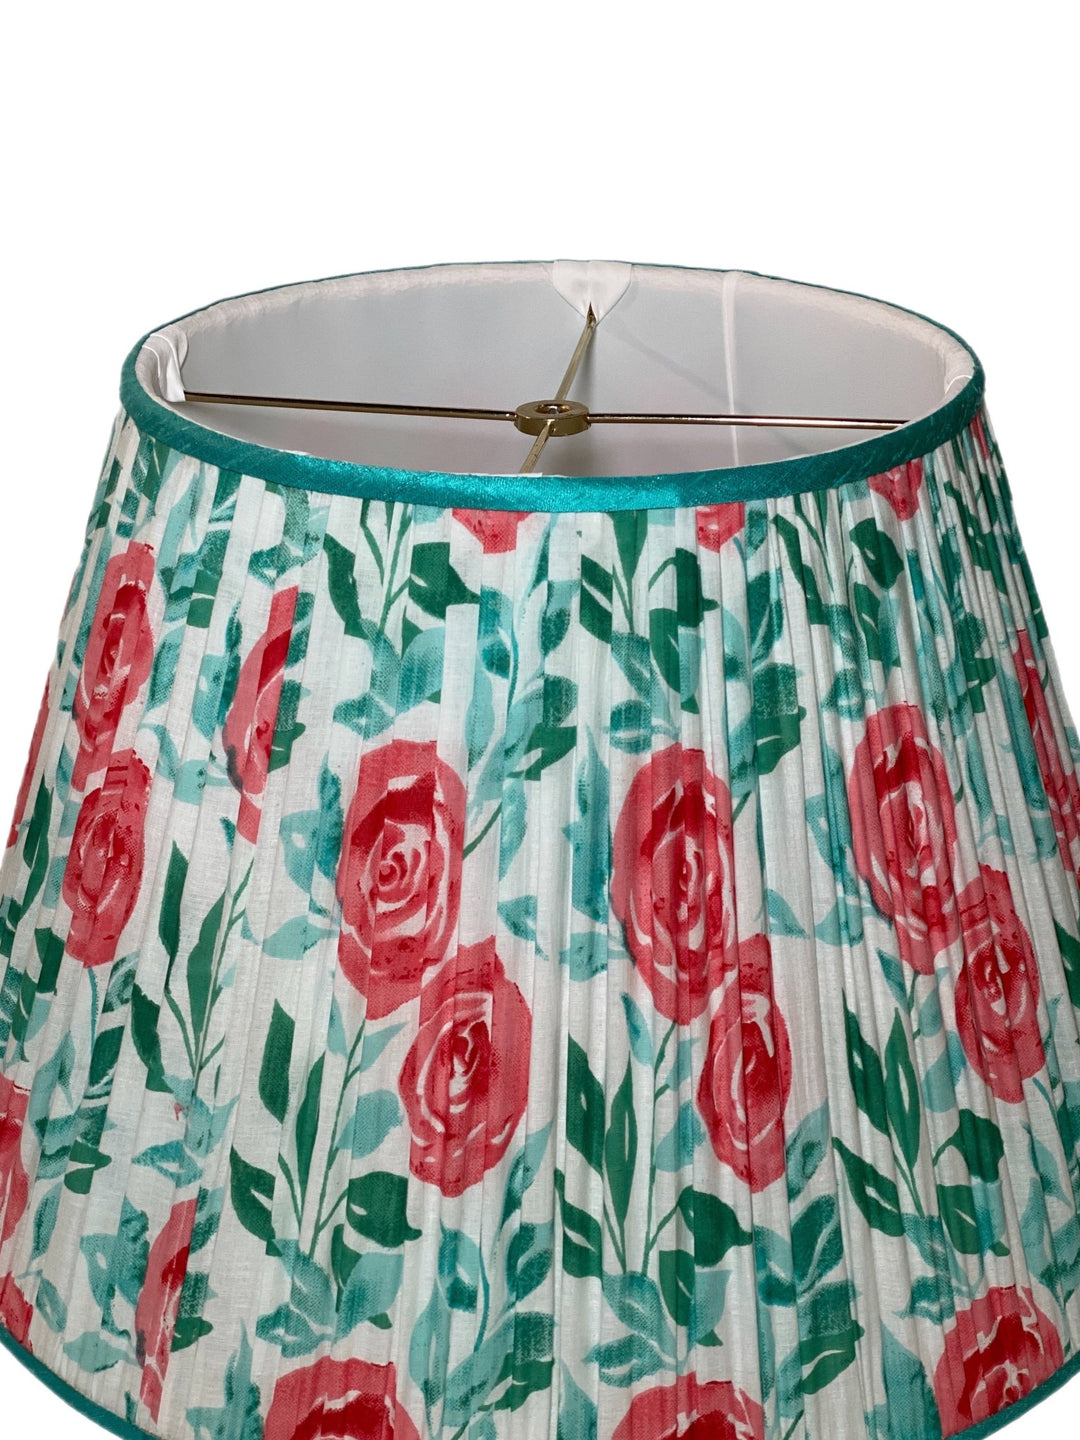 18" Gathered Sari Shade with Contrasting trim - Lux Lamp Shades